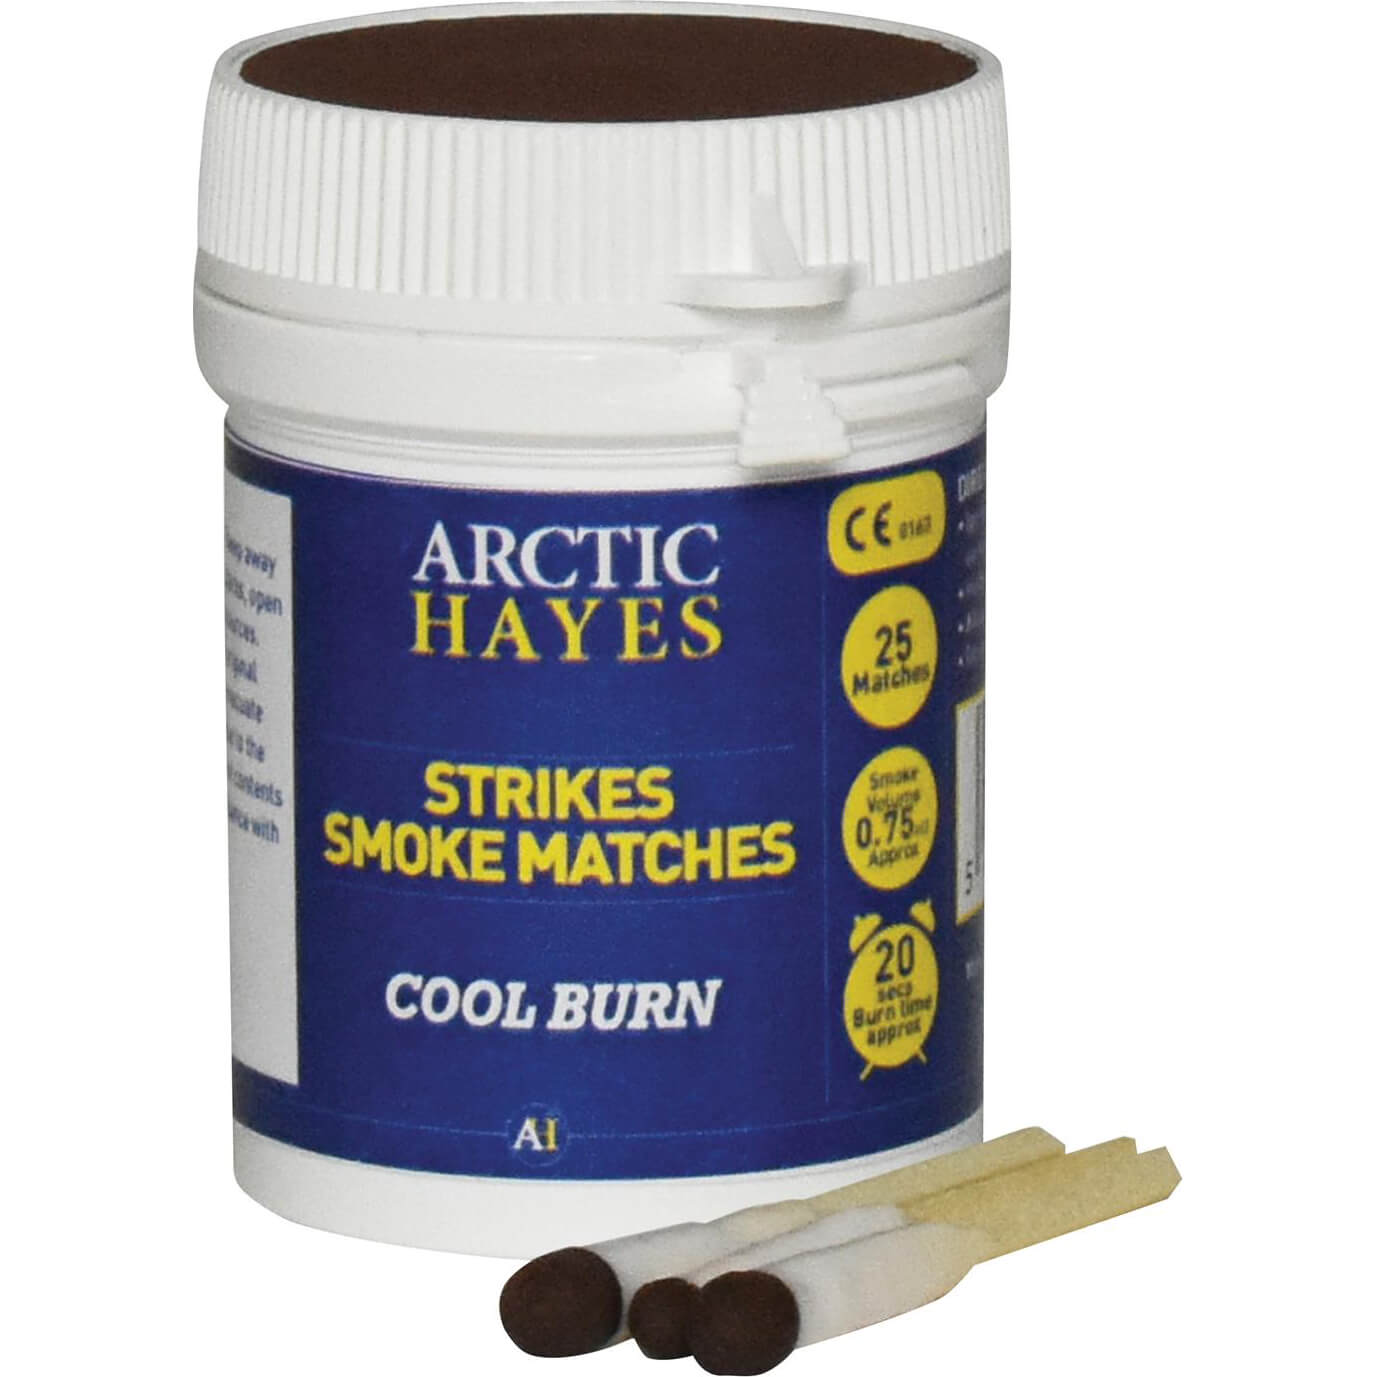 Image of Arctic Hayes Strikes Smoke Matches Pack of 25